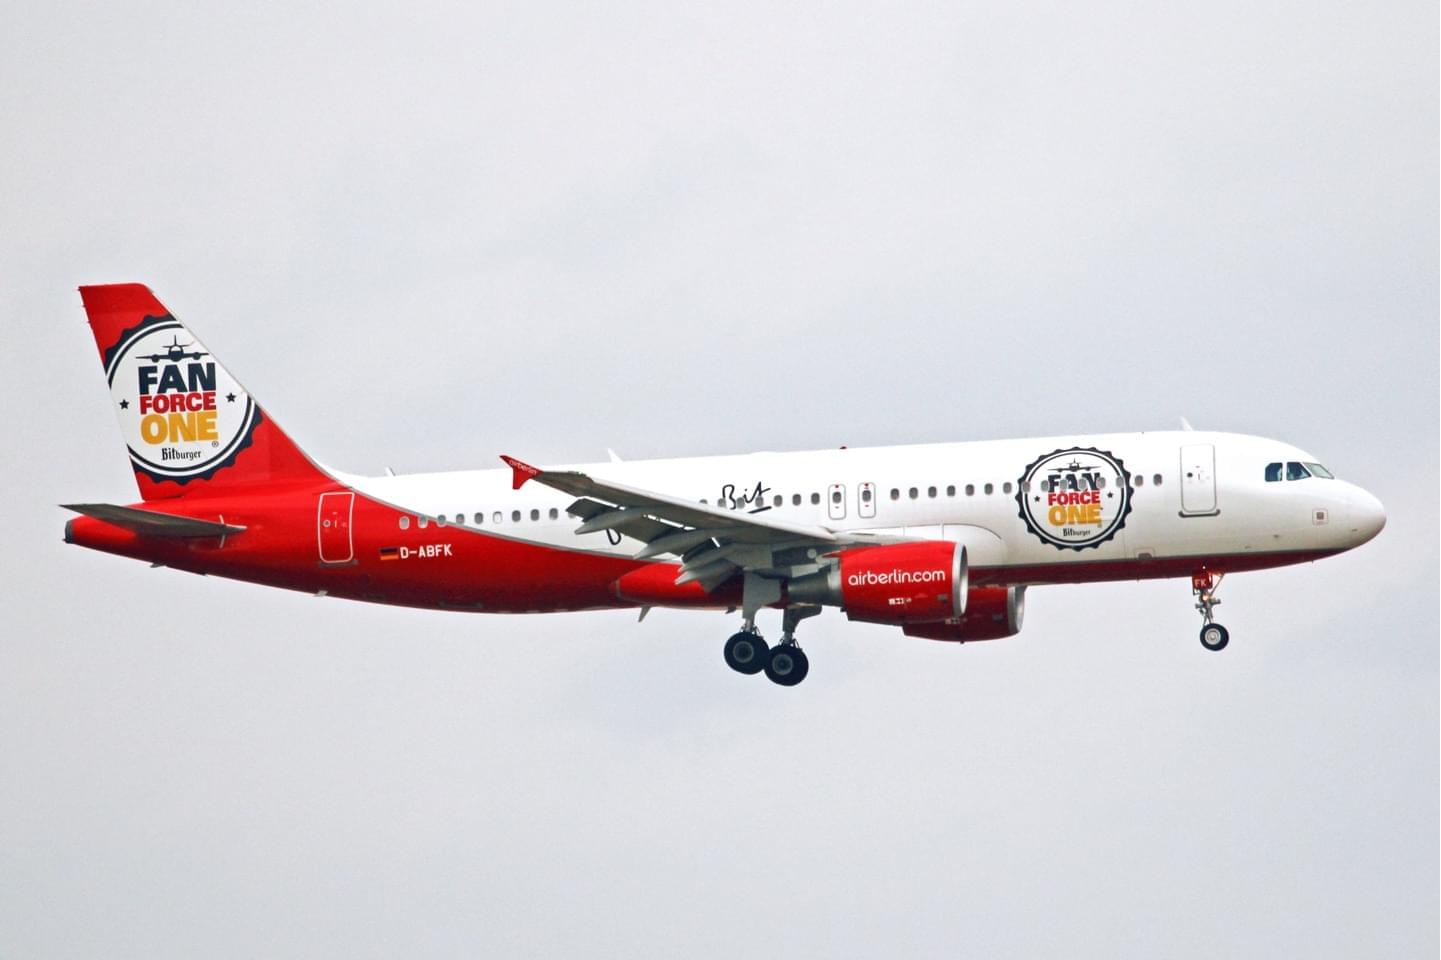 The FAN FORCE ONE Air Berlin plane after take off.